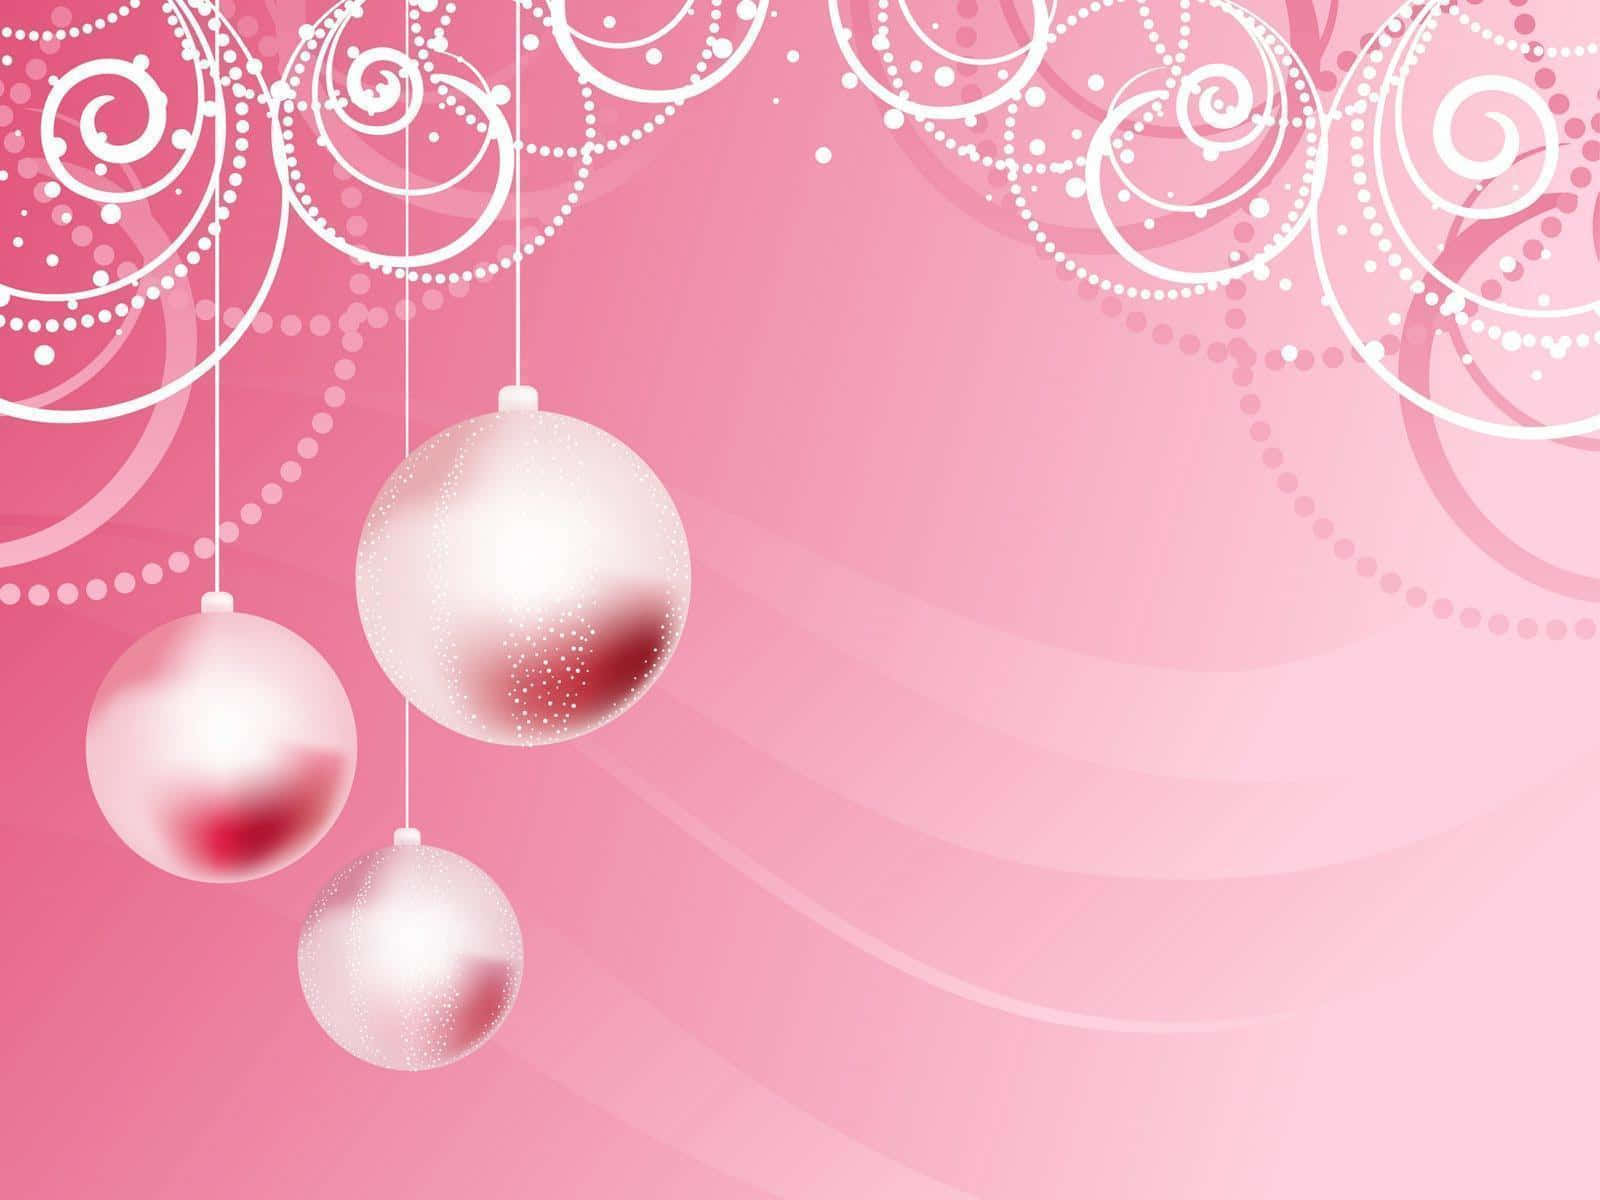 Spread the joy of Christmas with these cute pink decorations. Wallpaper